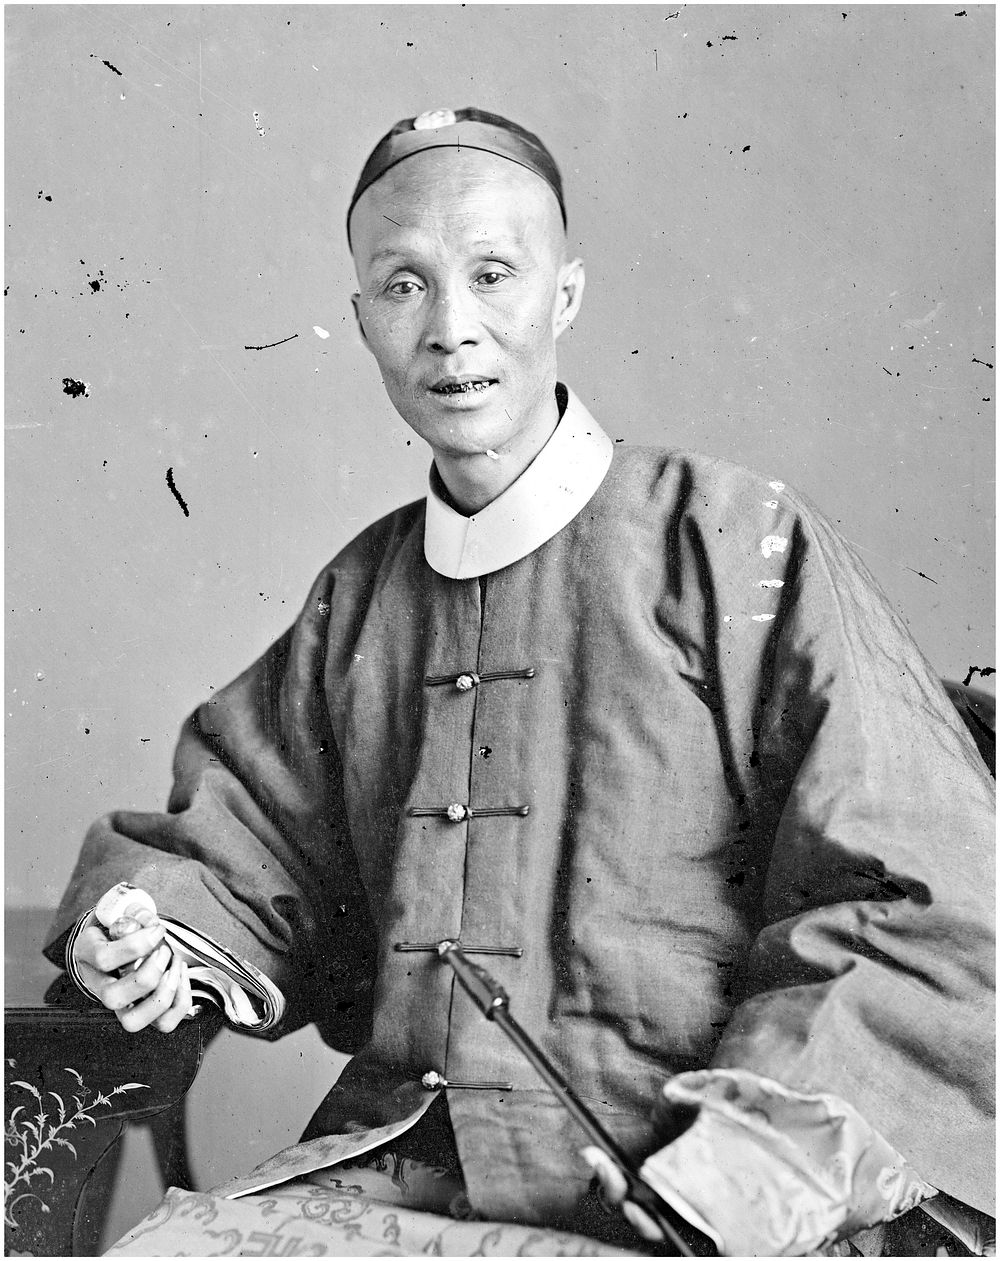 Canton, Kwangtung province, China: a Cantonese mandarin official. Photograph by John Thomson, 1869.